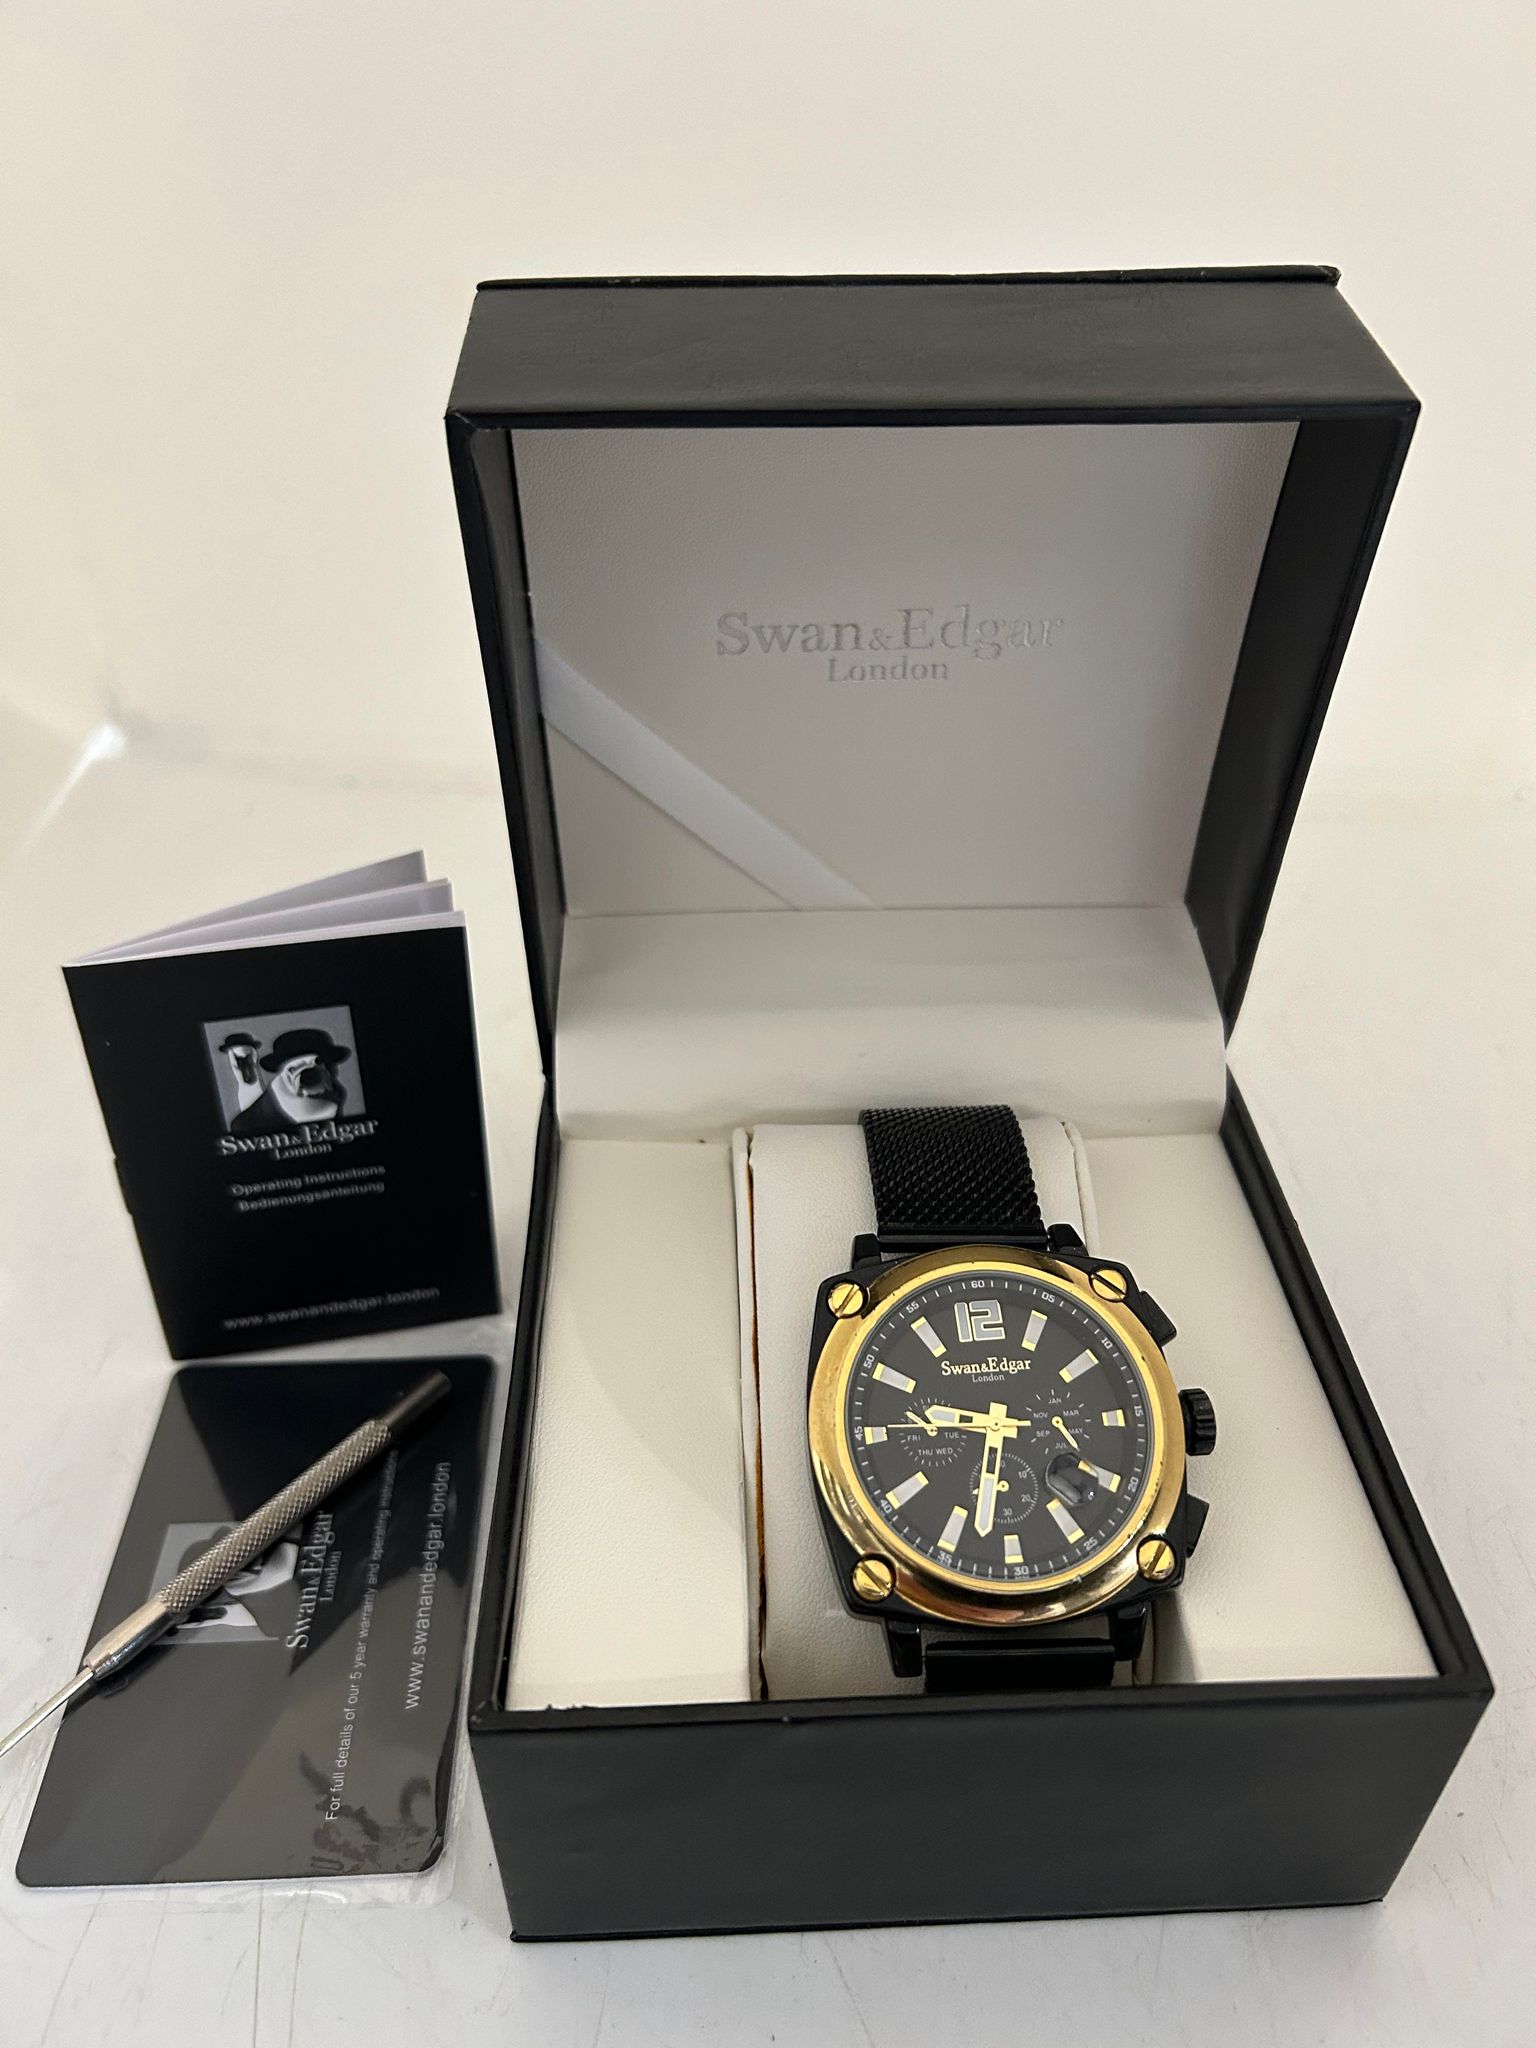 Swan & Edgar 3ATM Automatic Watch In Presentation Box With Booklet & Watch Tool